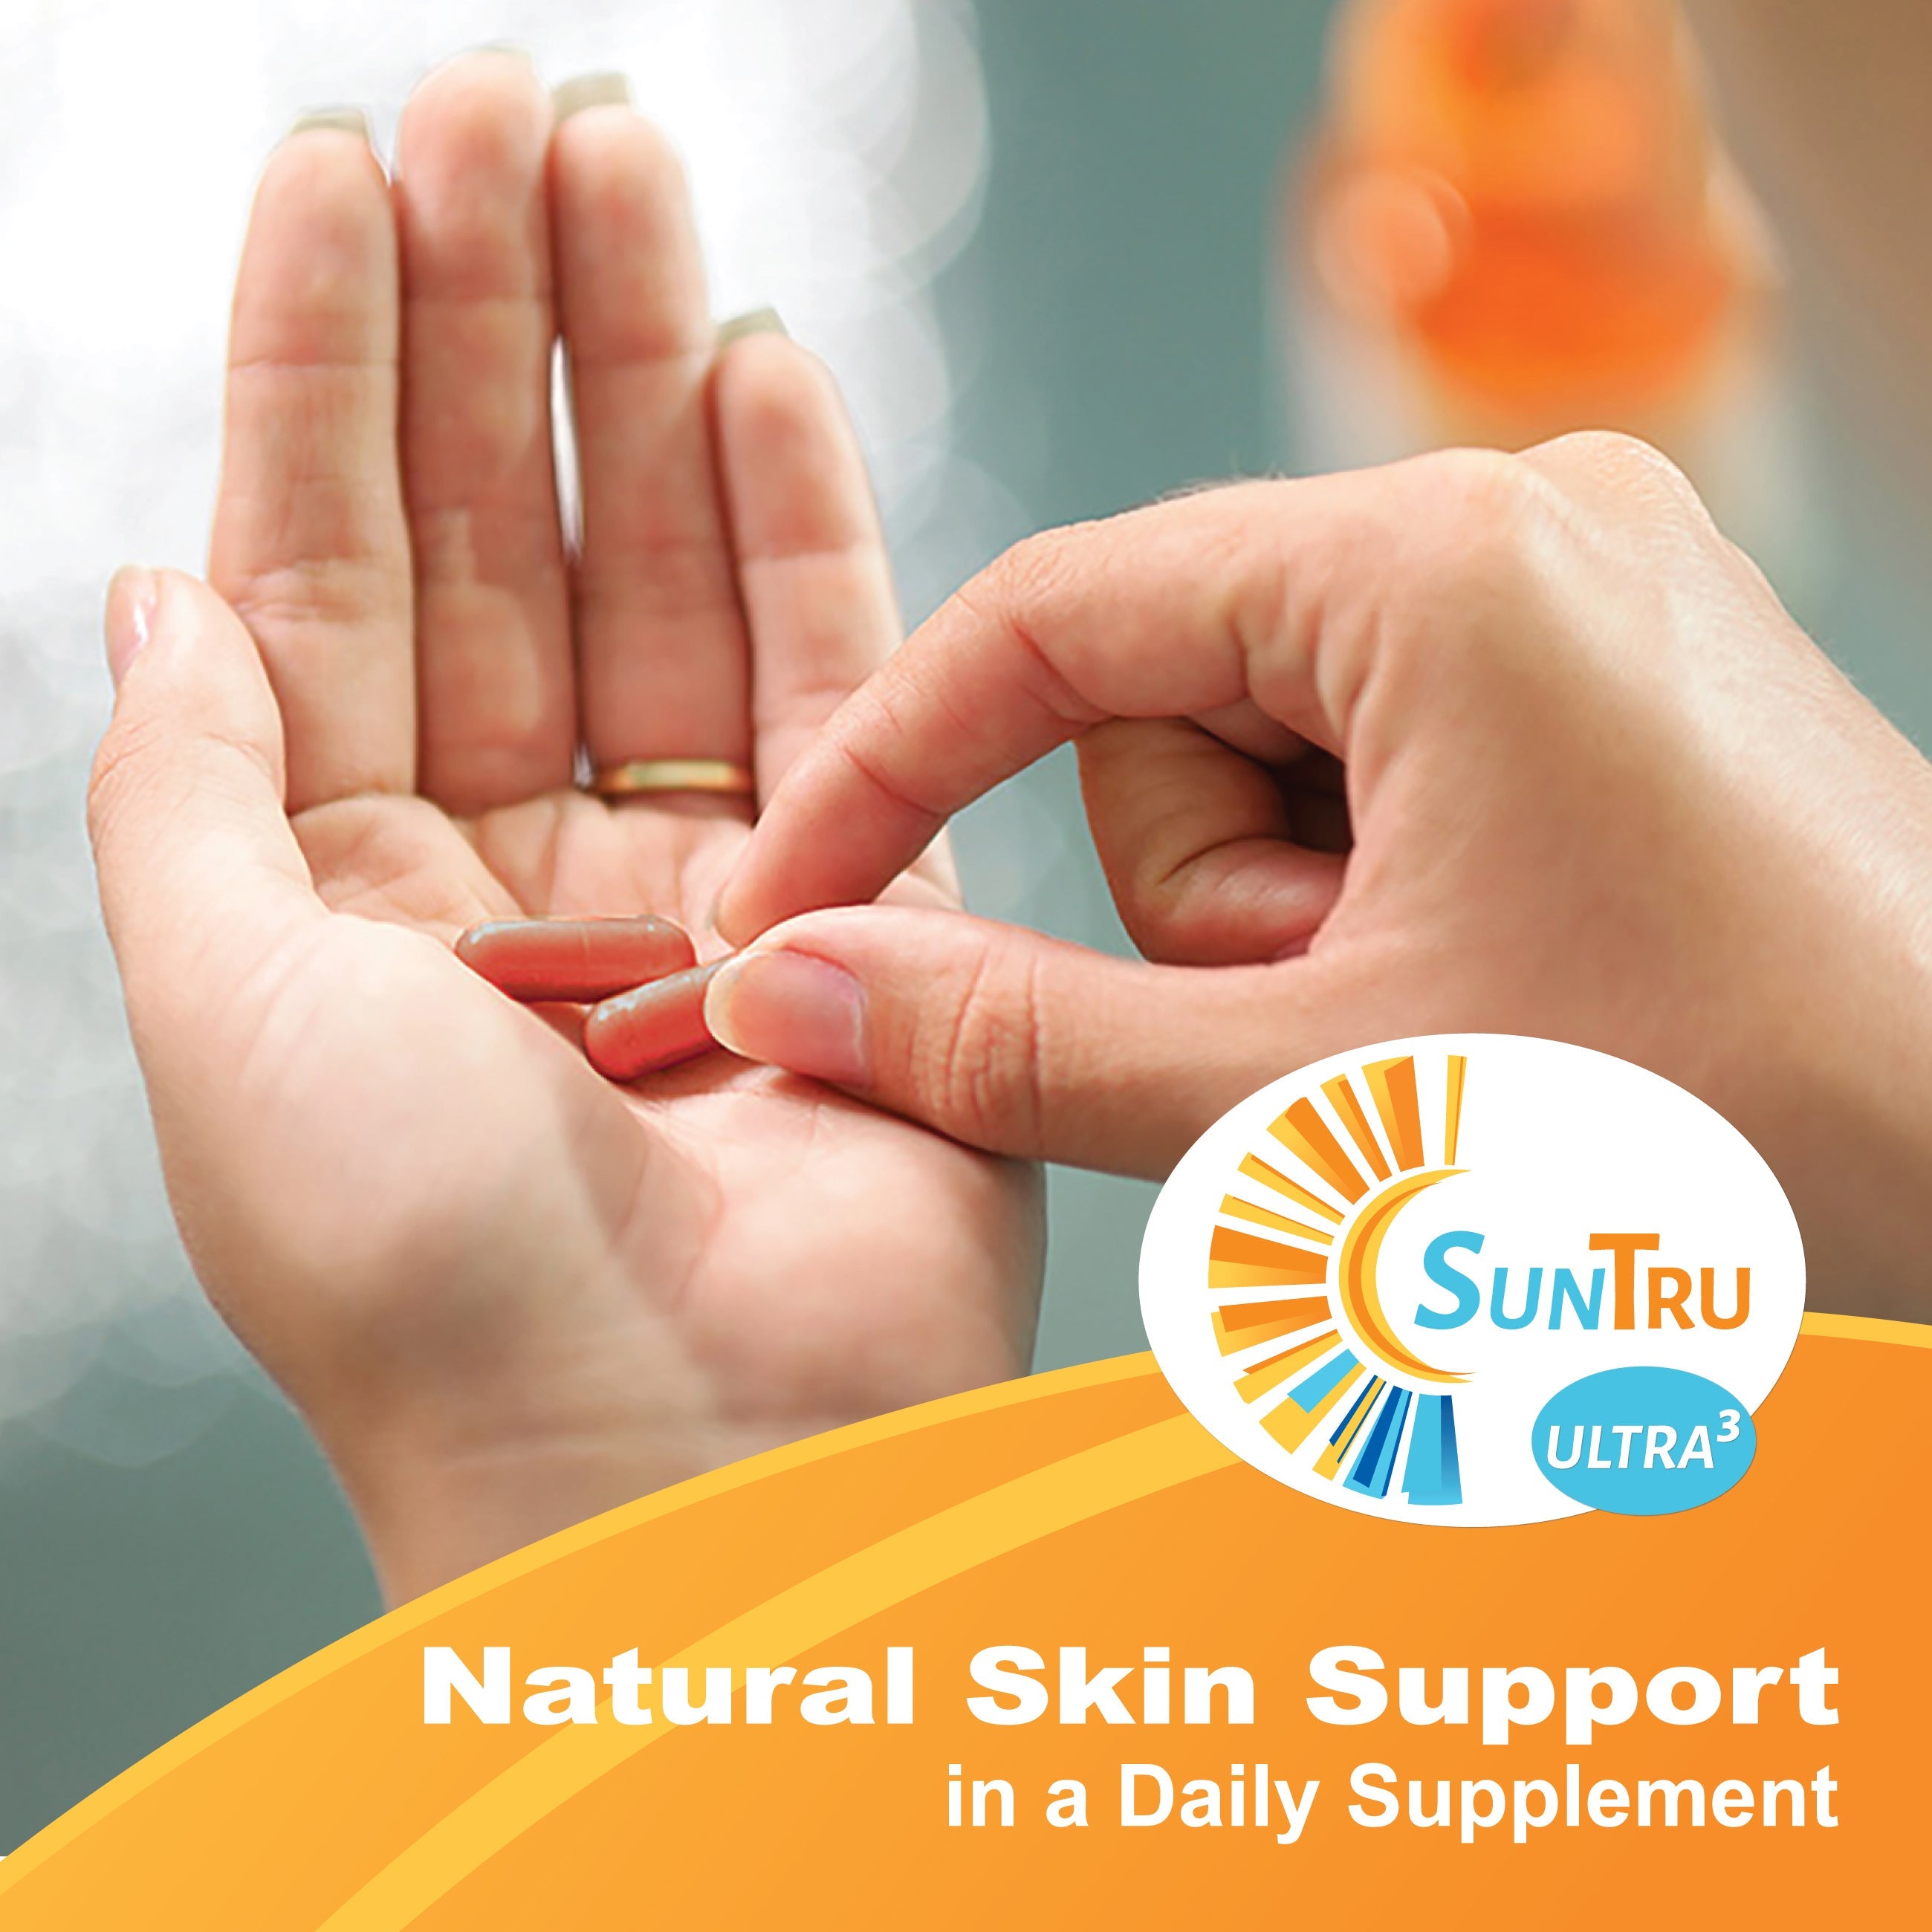 Two SunTru Ultra 3 daily skin supplement capsules in a female hand. Text - Natural Skin Support in a Daily Supplement with SunTru logo